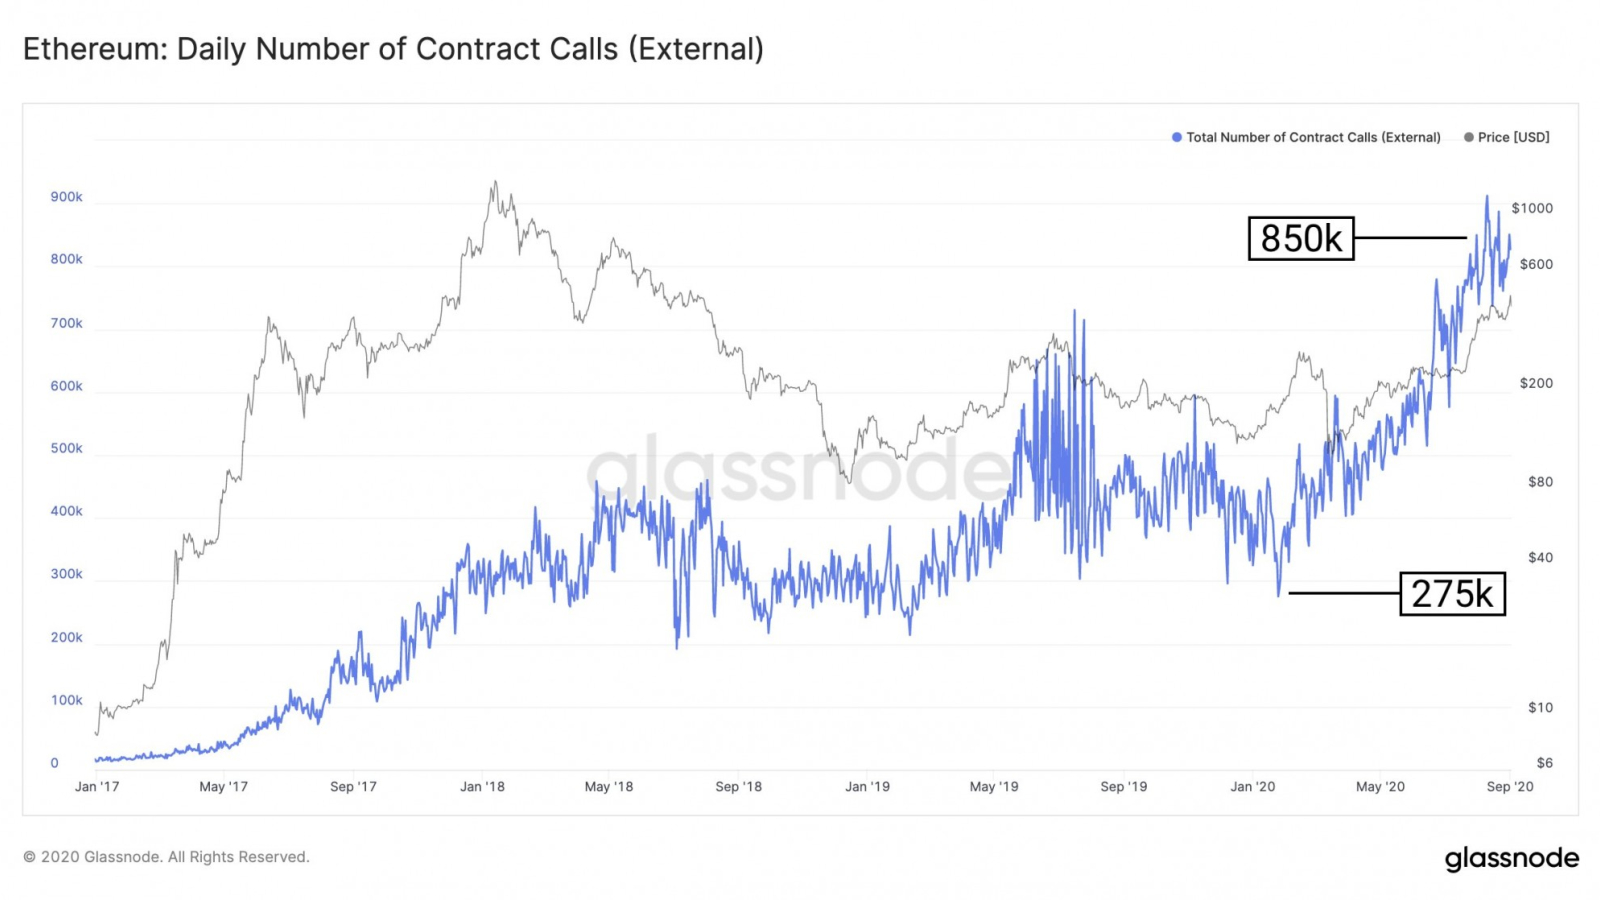 The daily number of contract calls on Ethereum. Source: Glassnode